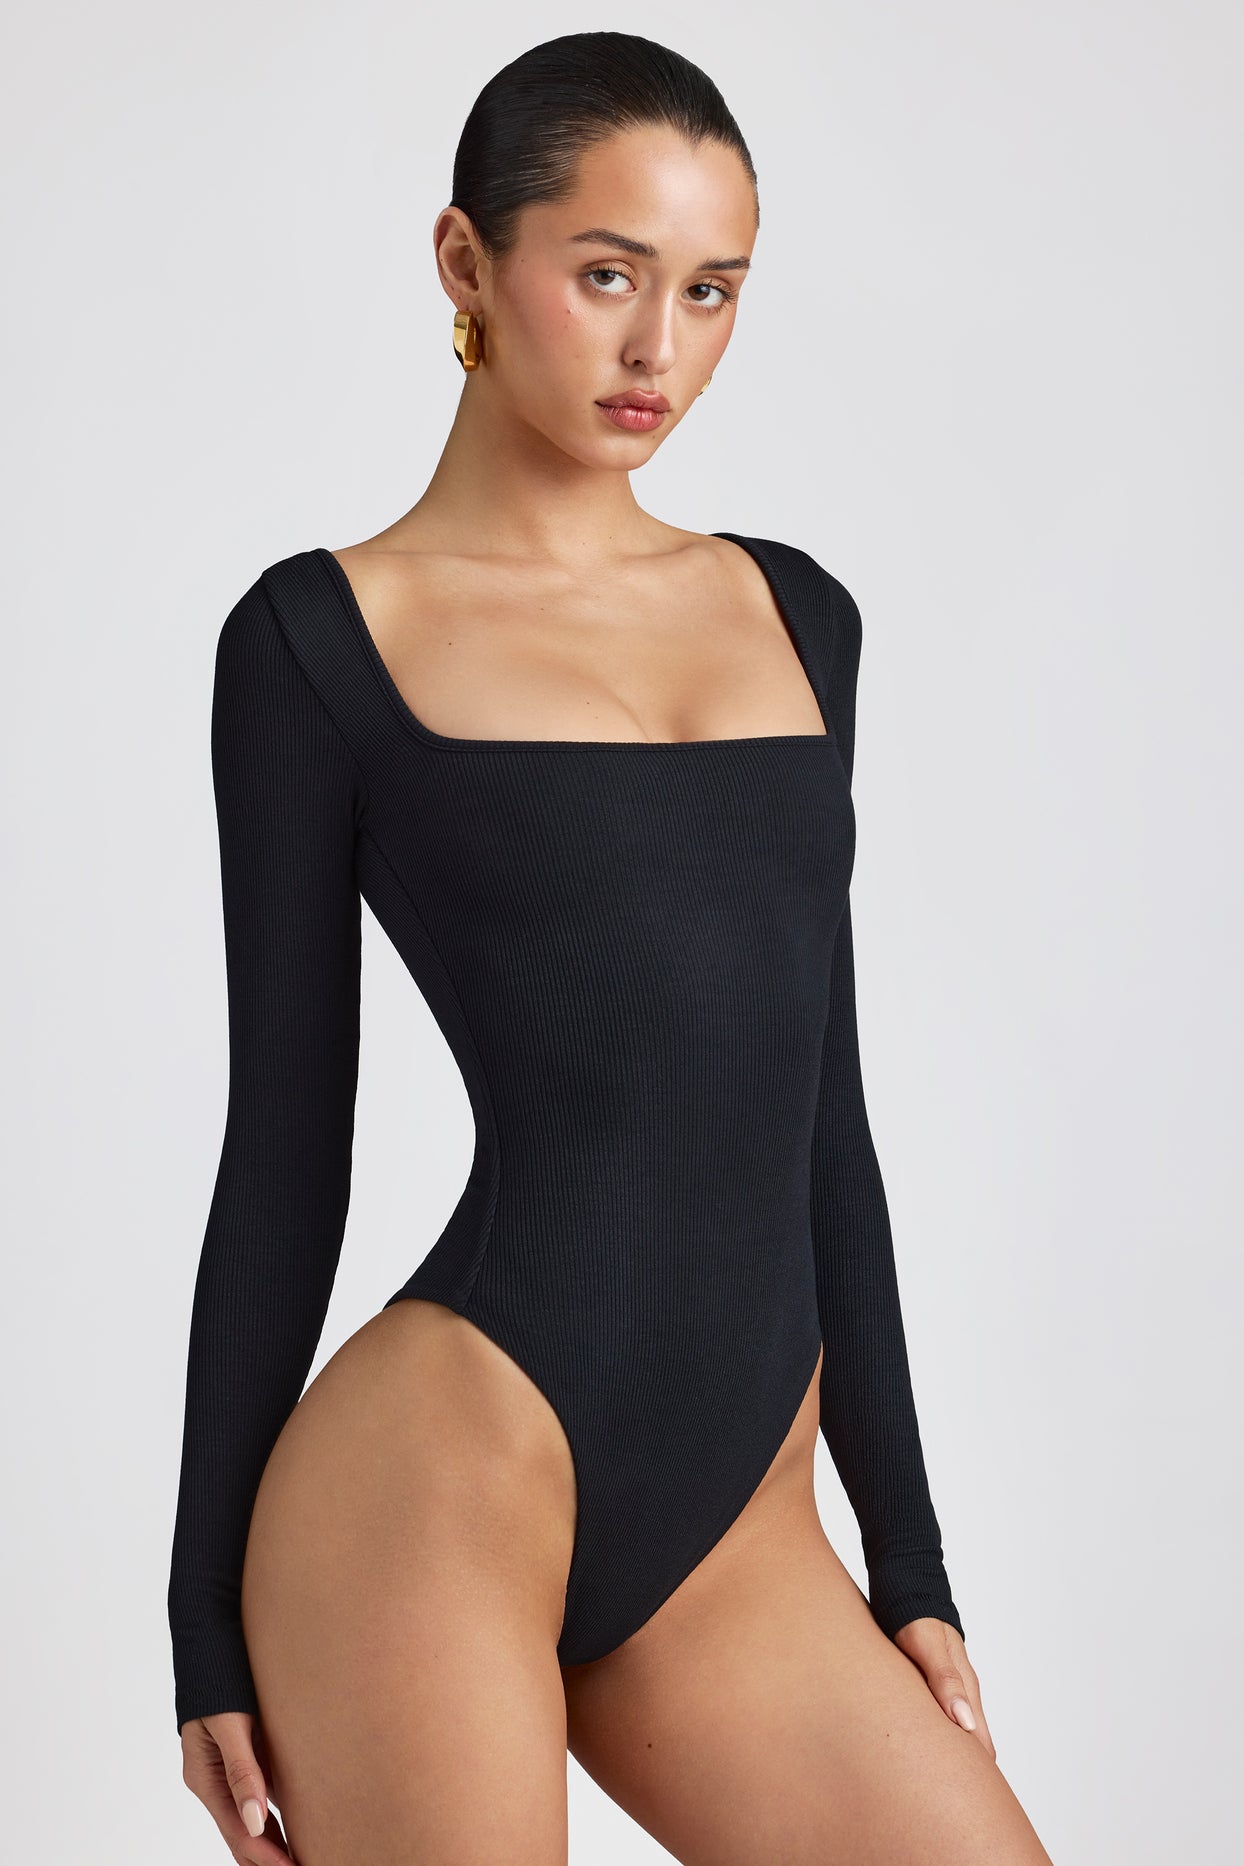 Black Tulle Bodysuit With Long Sleeves